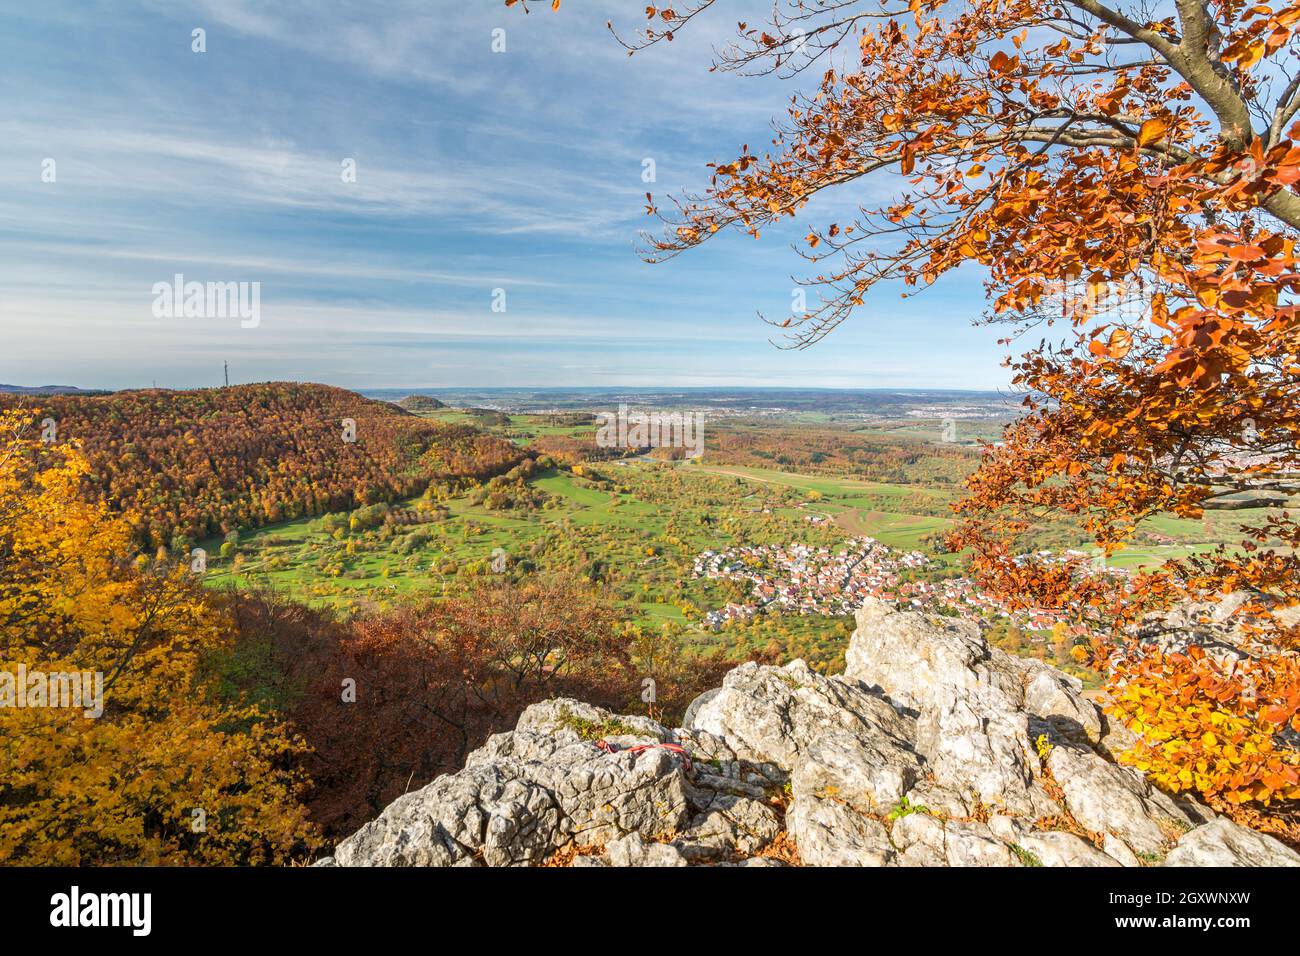 View from a cliff ledge over beautiful autumn landscape in the Swabian Alps in Southern Germany Stock Photo